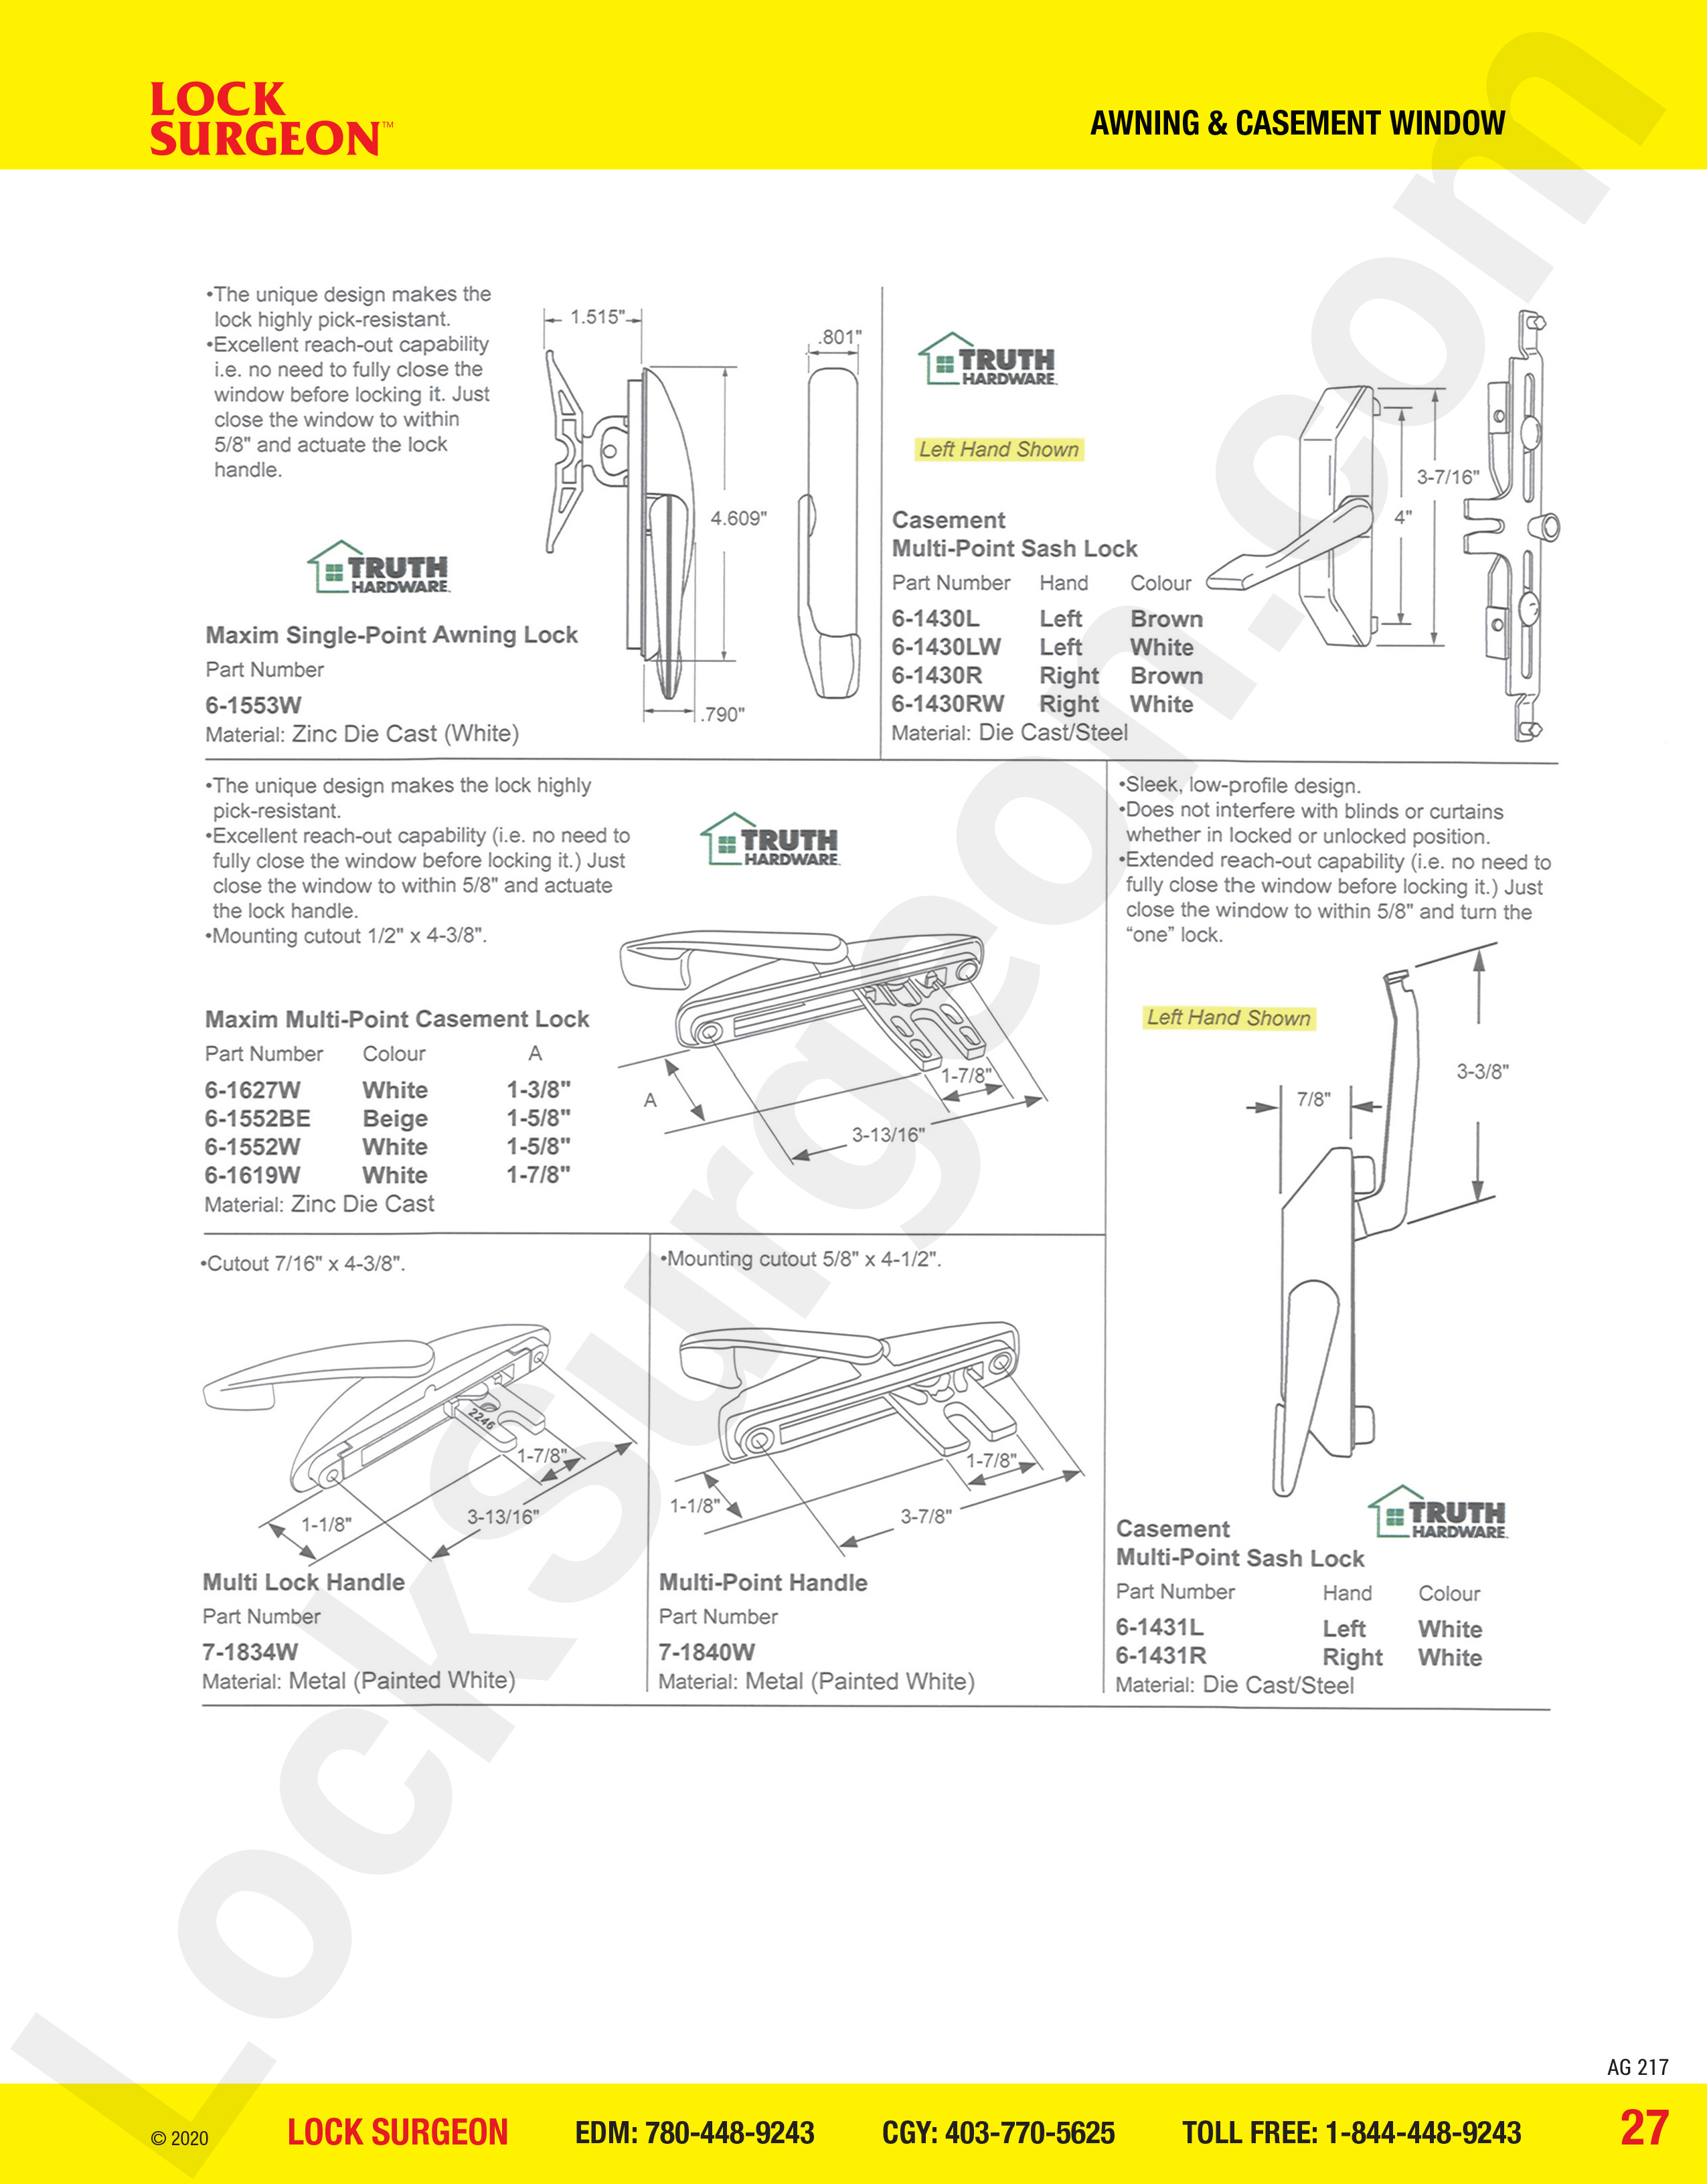 Acheson mobile awning and casement window parts for locks